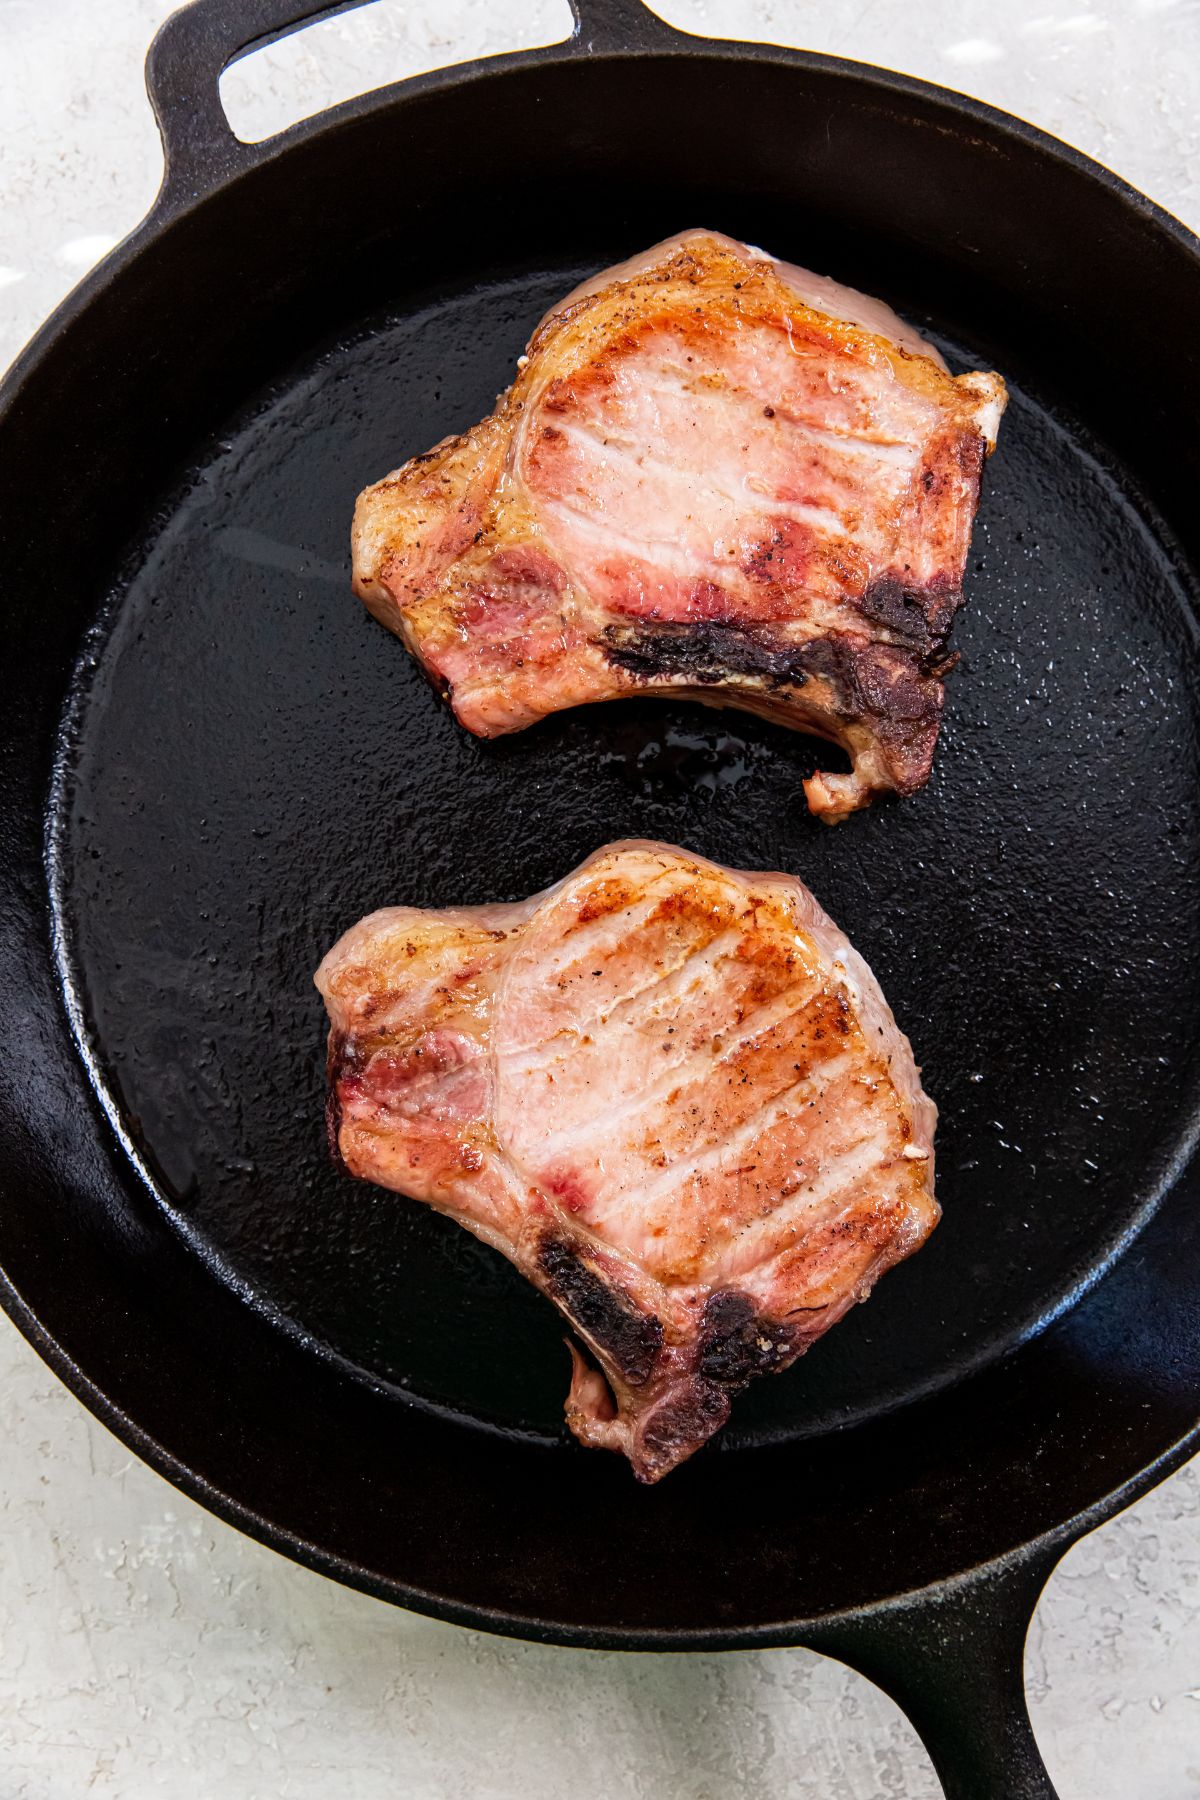 Traeger Smoked Pork Chops in a cast iron skillet